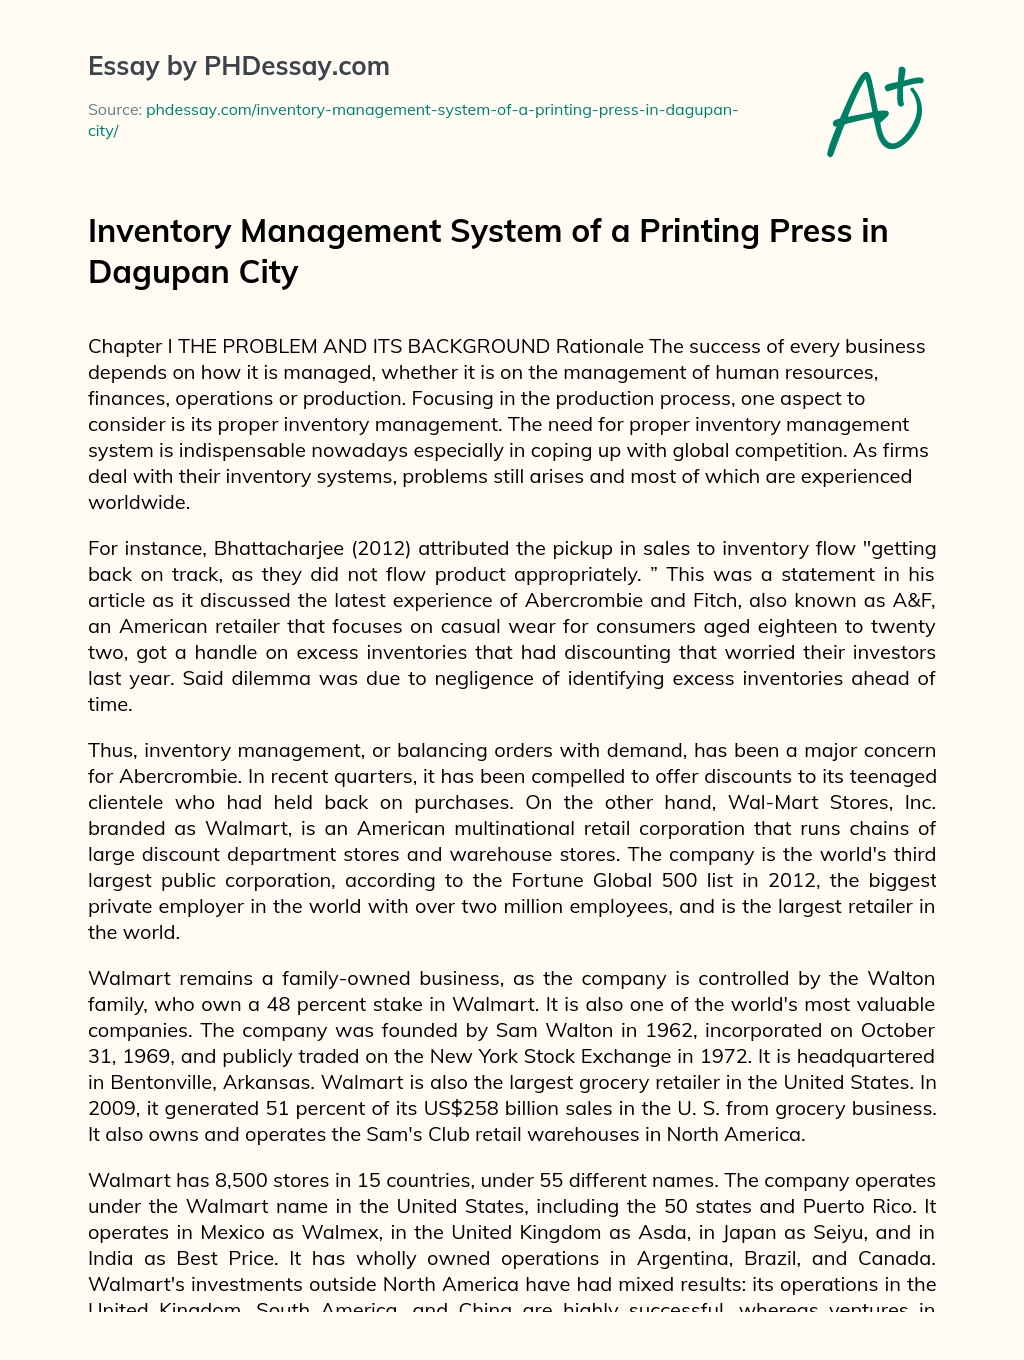 Inventory Management System of a Printing Press in Dagupan City essay